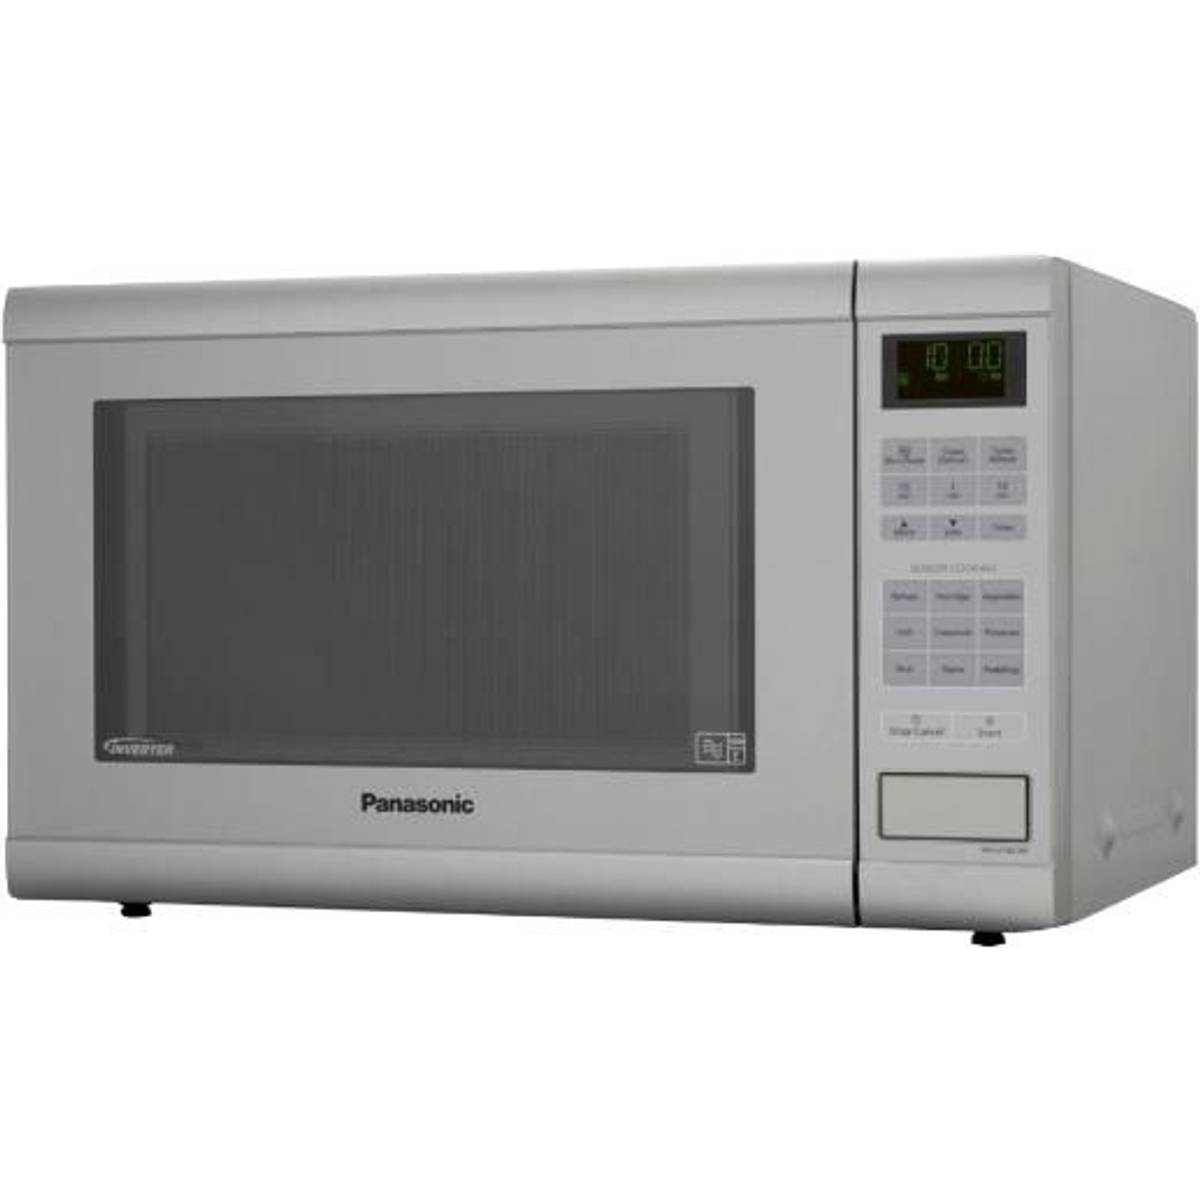 Compare best Microwaves prices on the market - PriceRunner